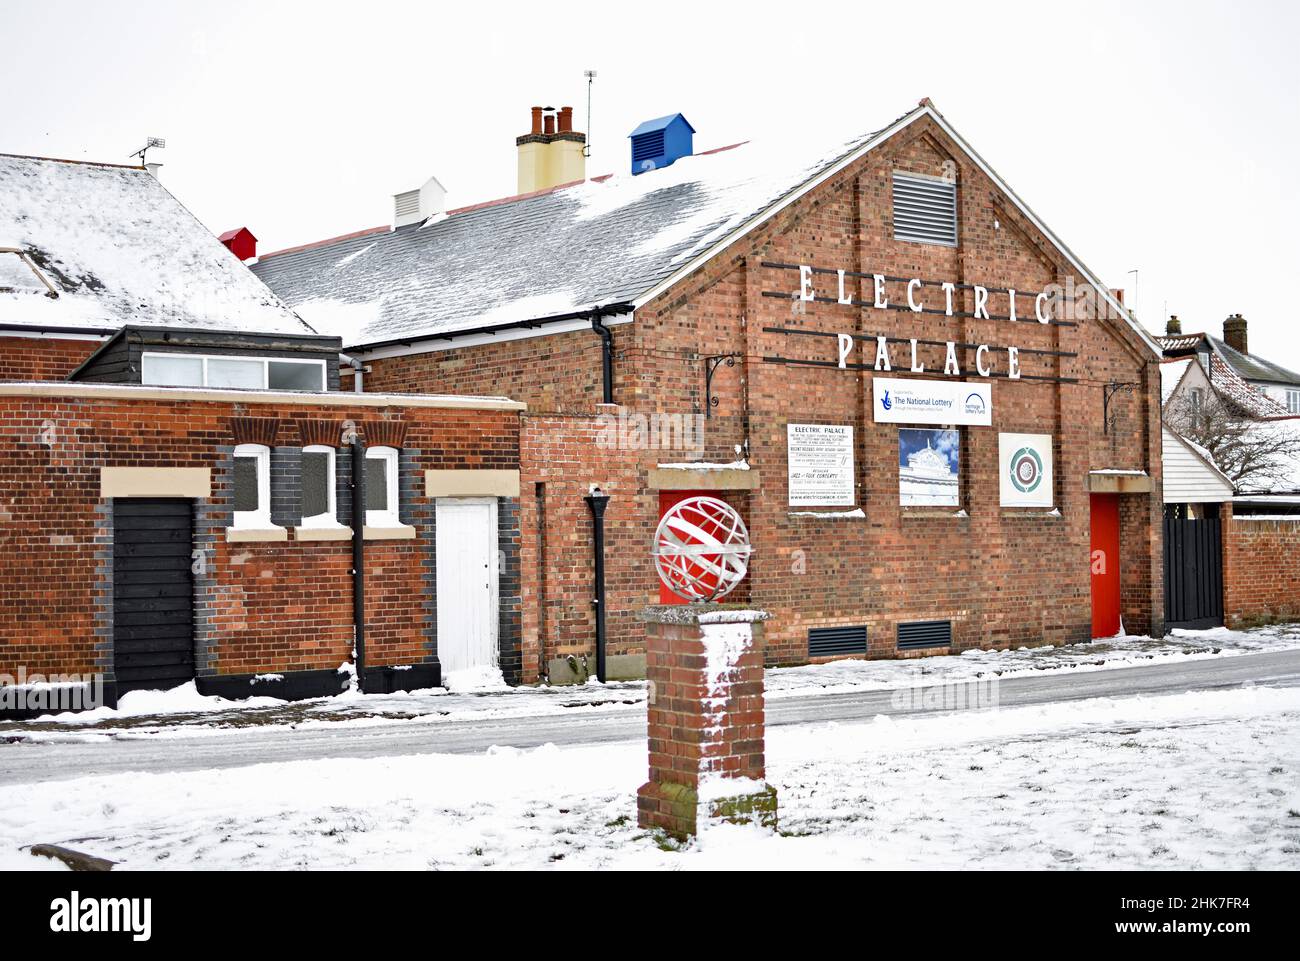 The rear brick exterior side of the Electric Palace, one of the oldest surviving cinemas, Harwich, UK. Snow covers the ground after a winter storm. Stock Photo